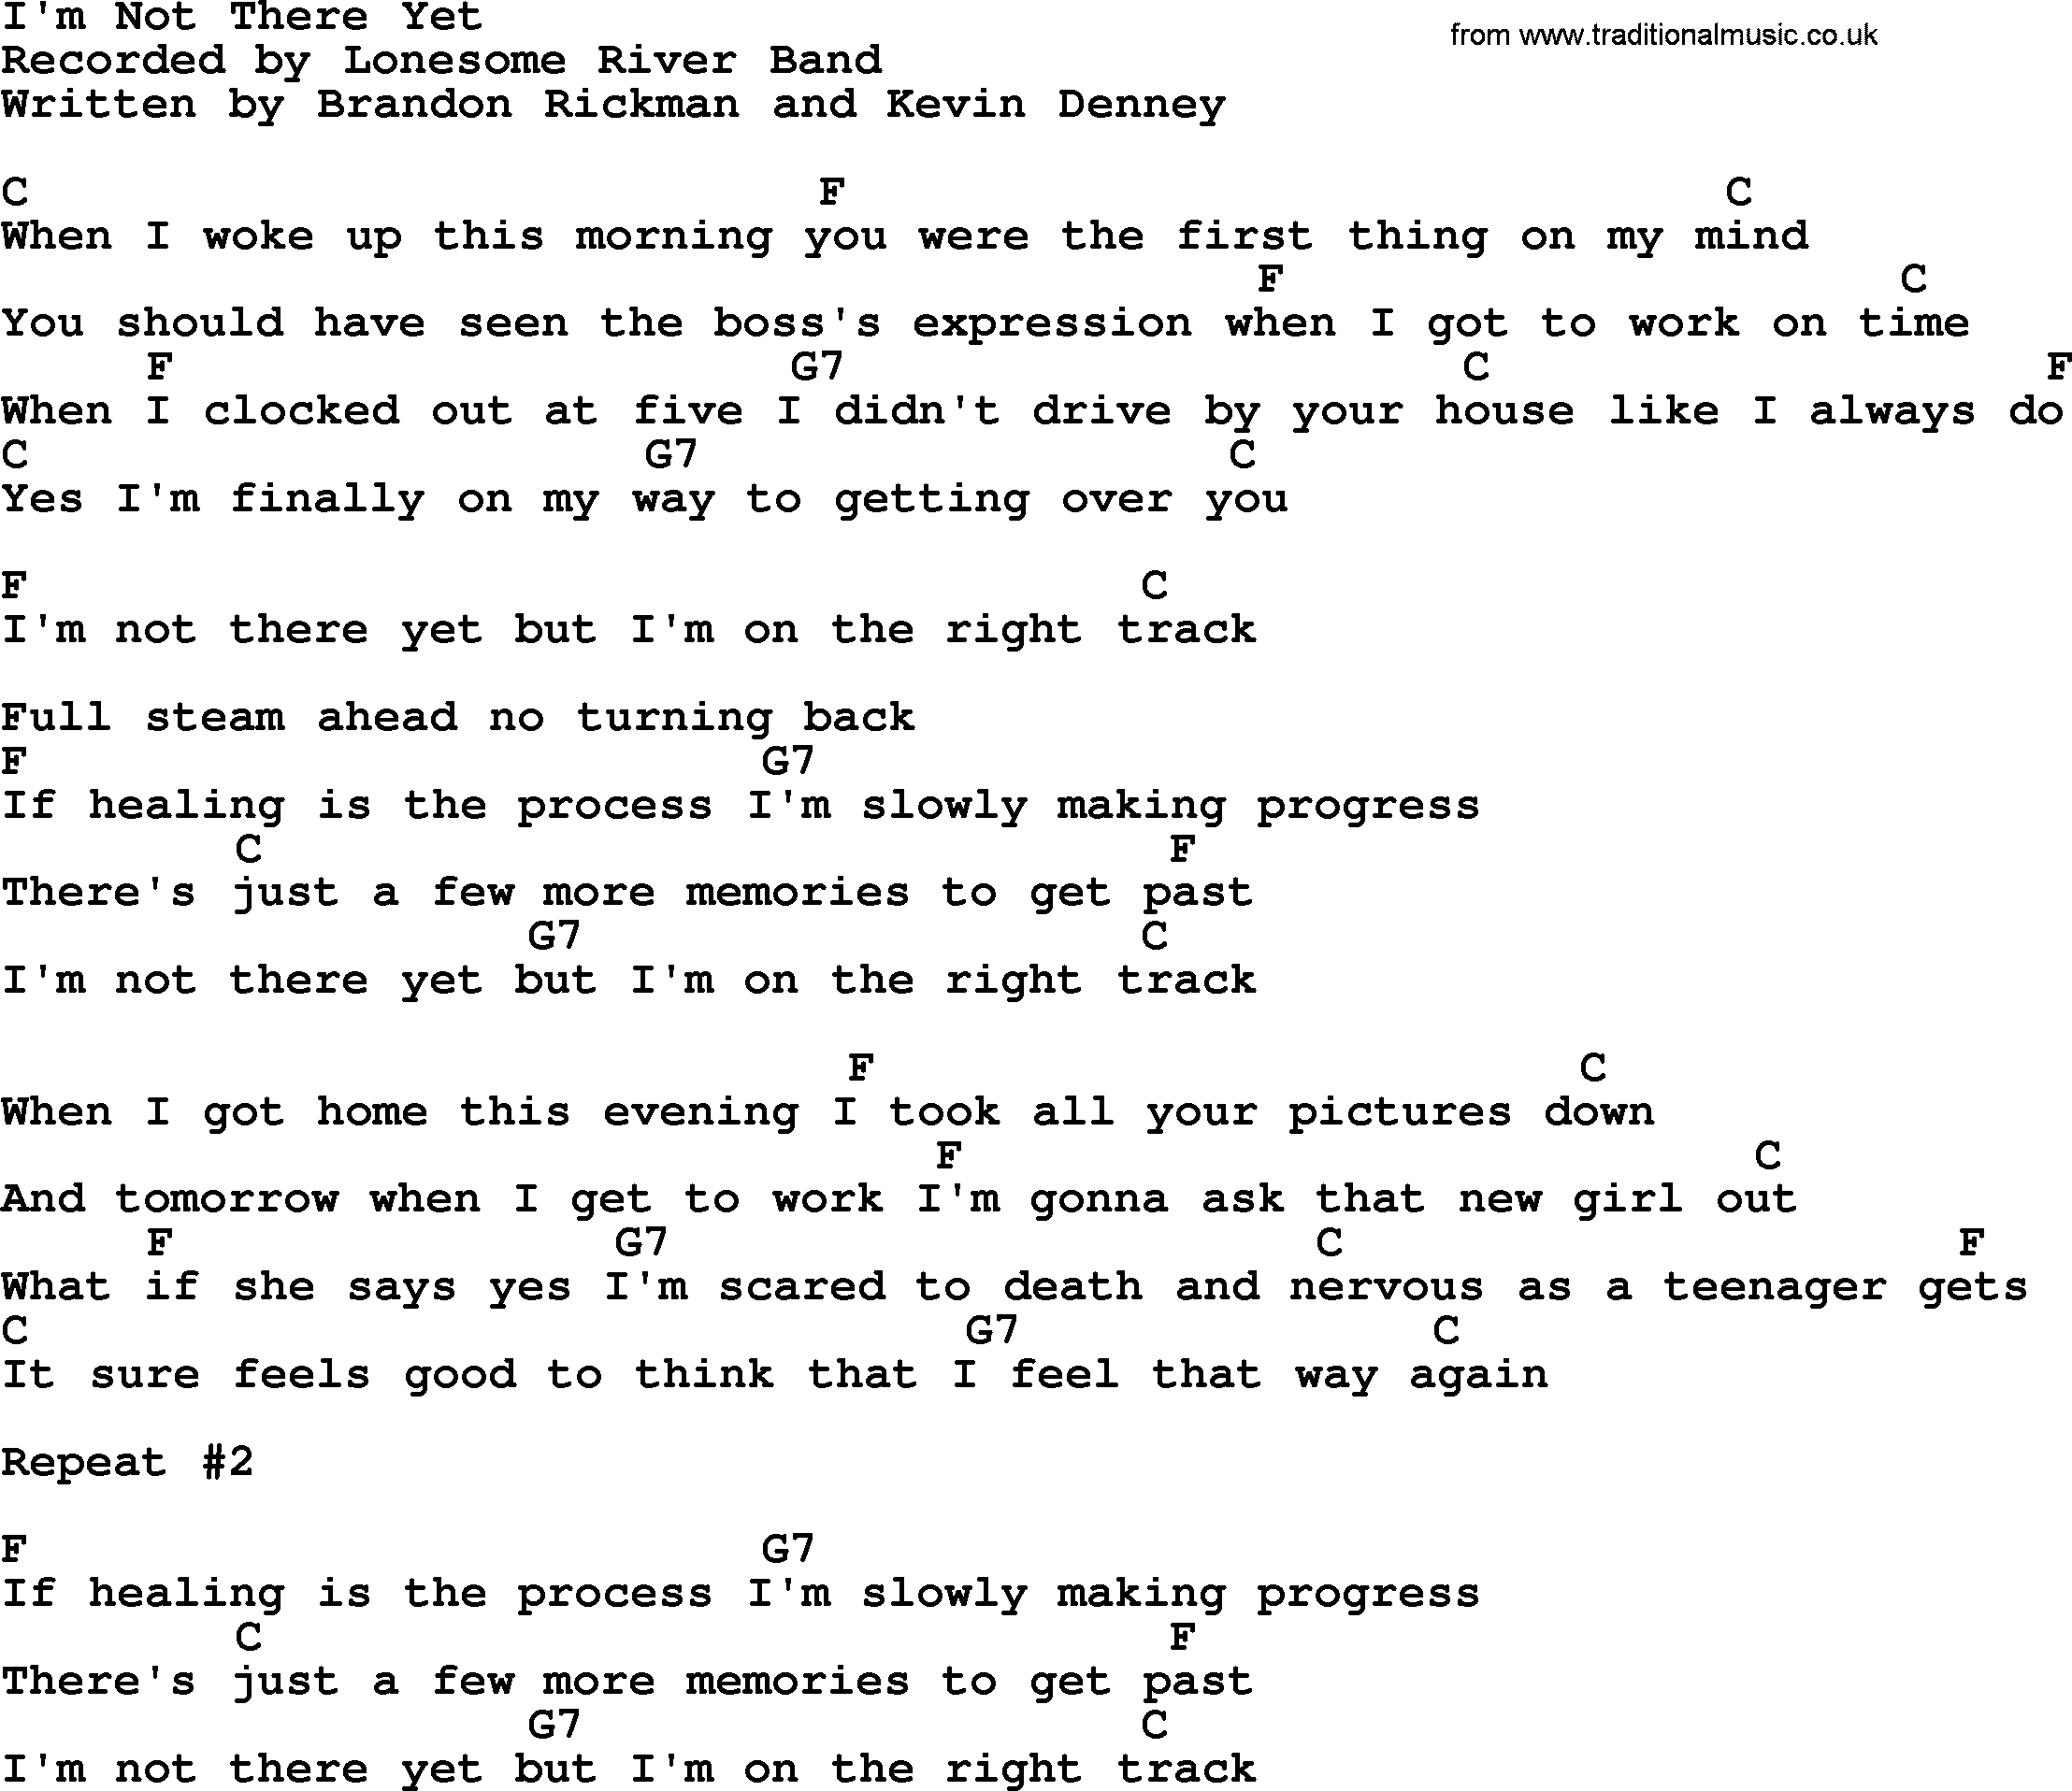 Bluegrass song: I'm Not There Yet, lyrics and chords